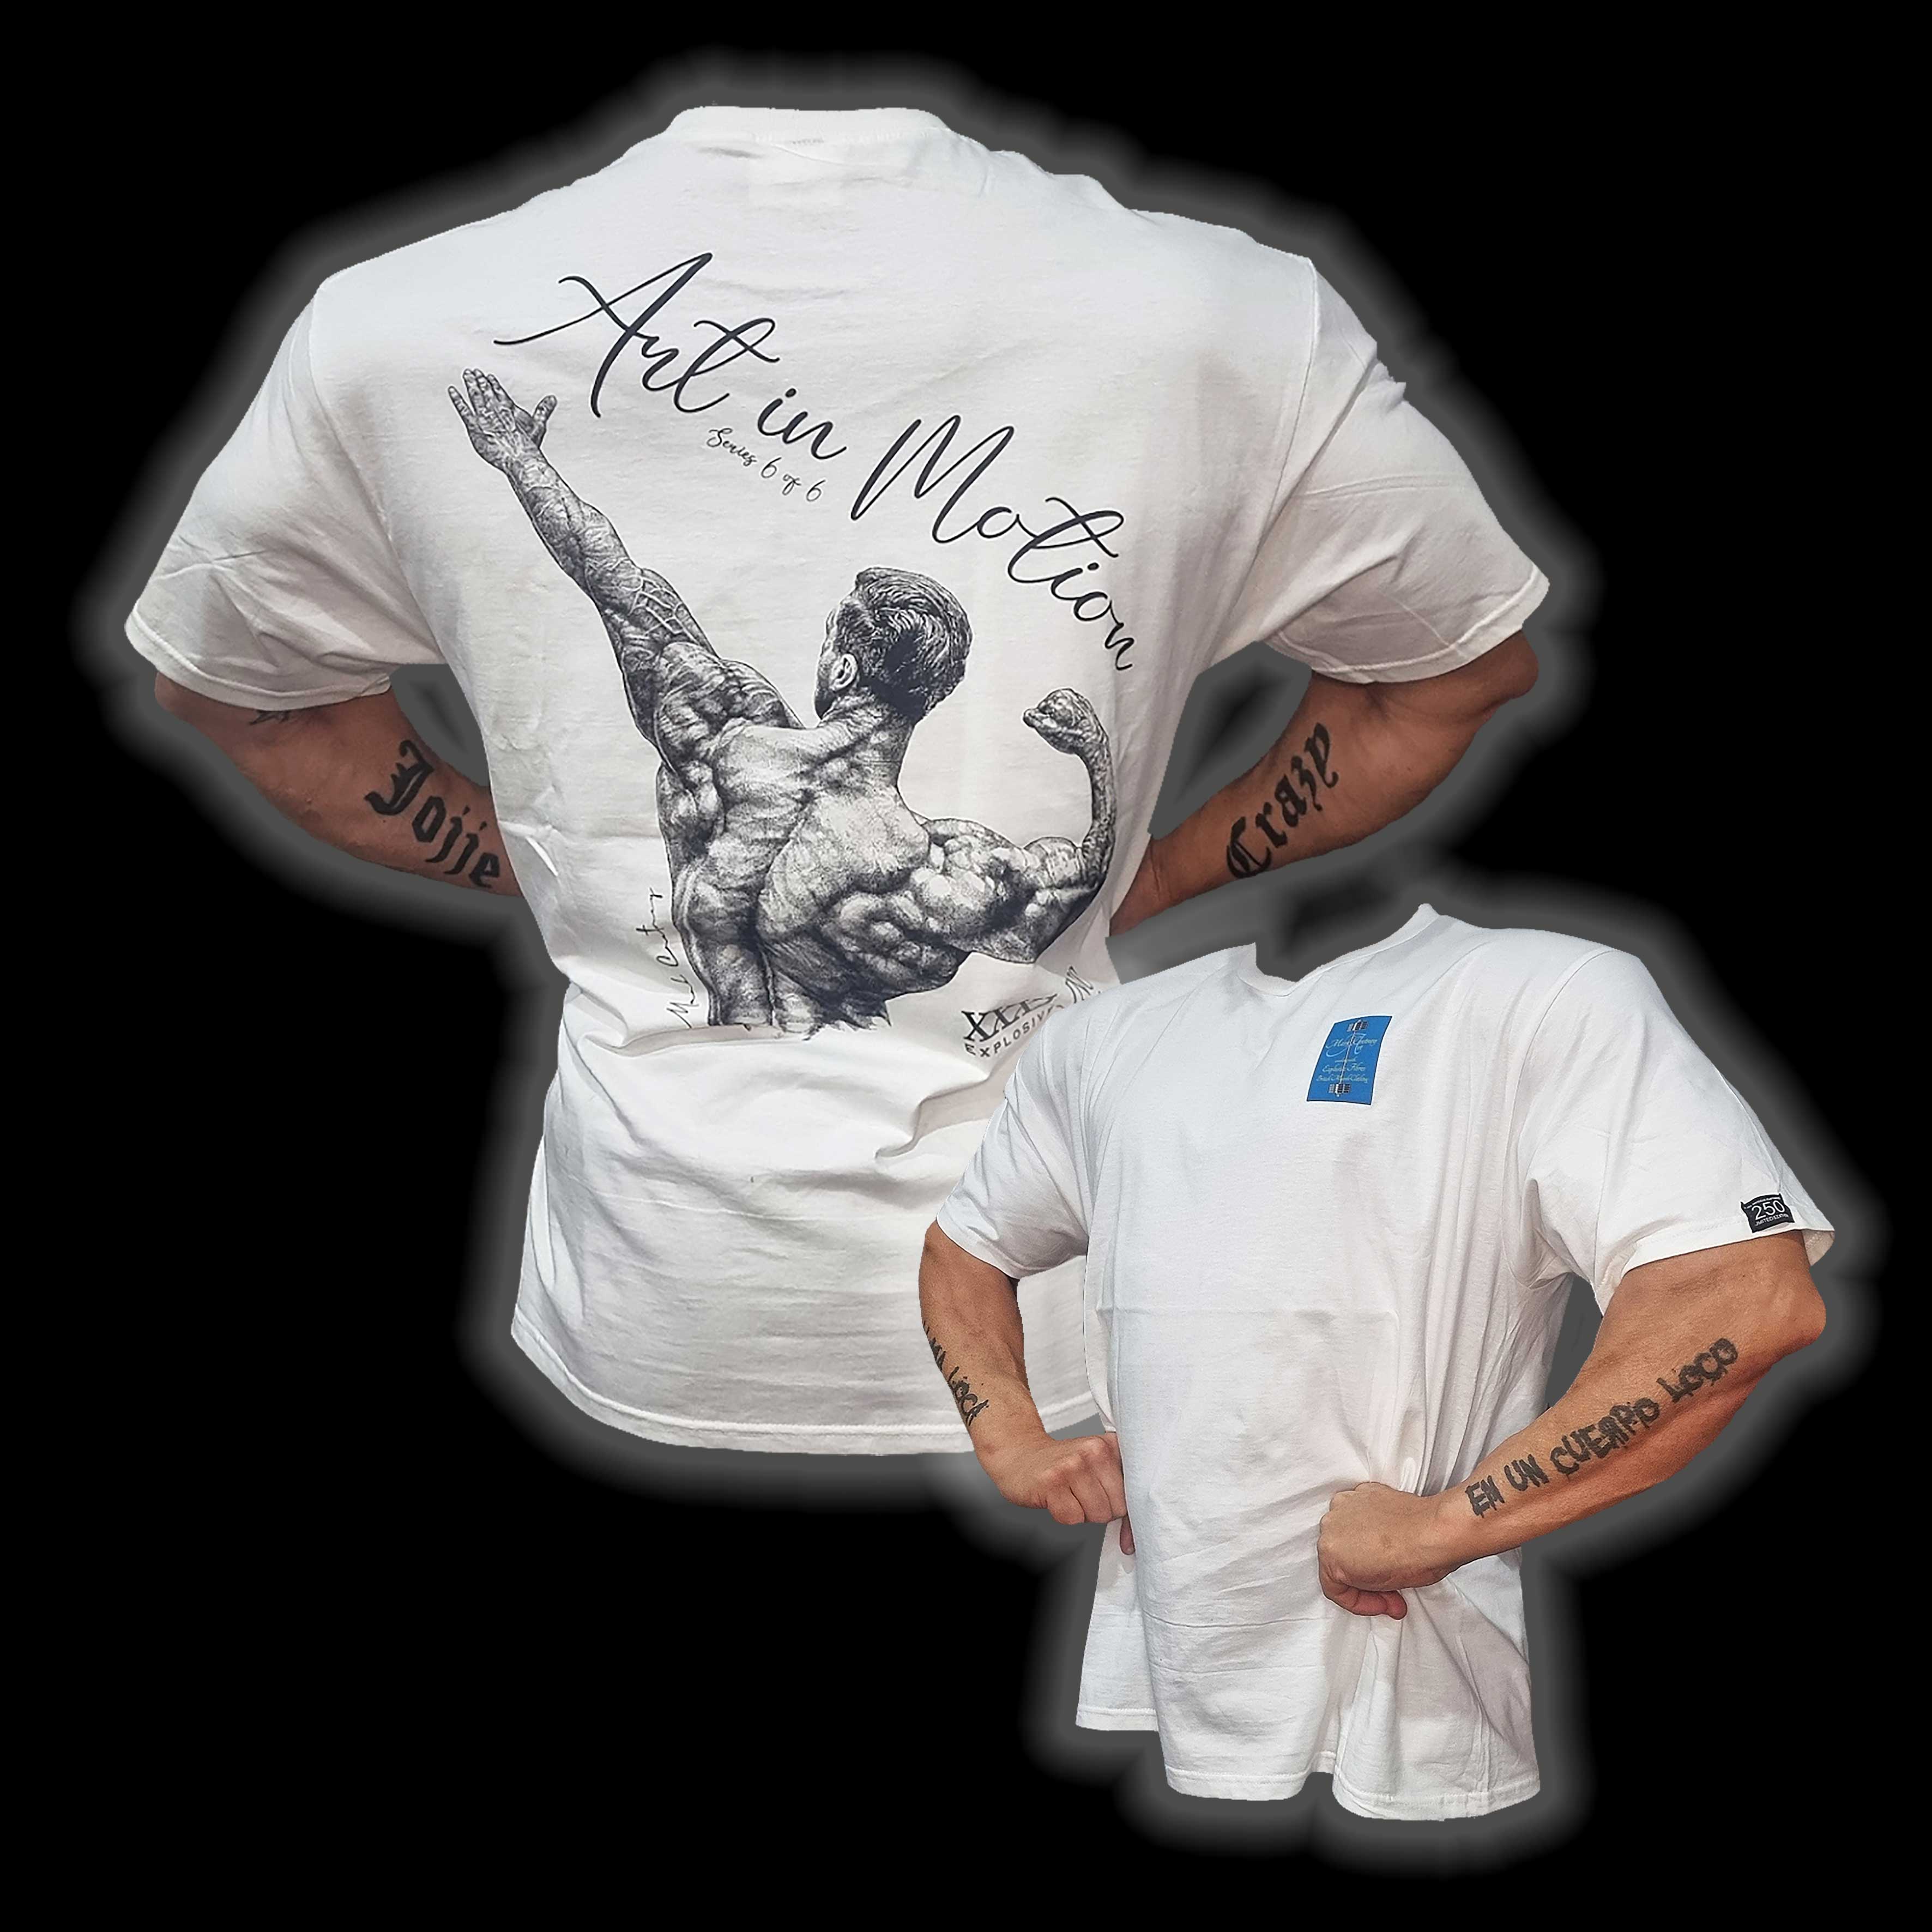 "Art in Motion "Series 6 of 6" 250 Limited Edition T Shirt - White